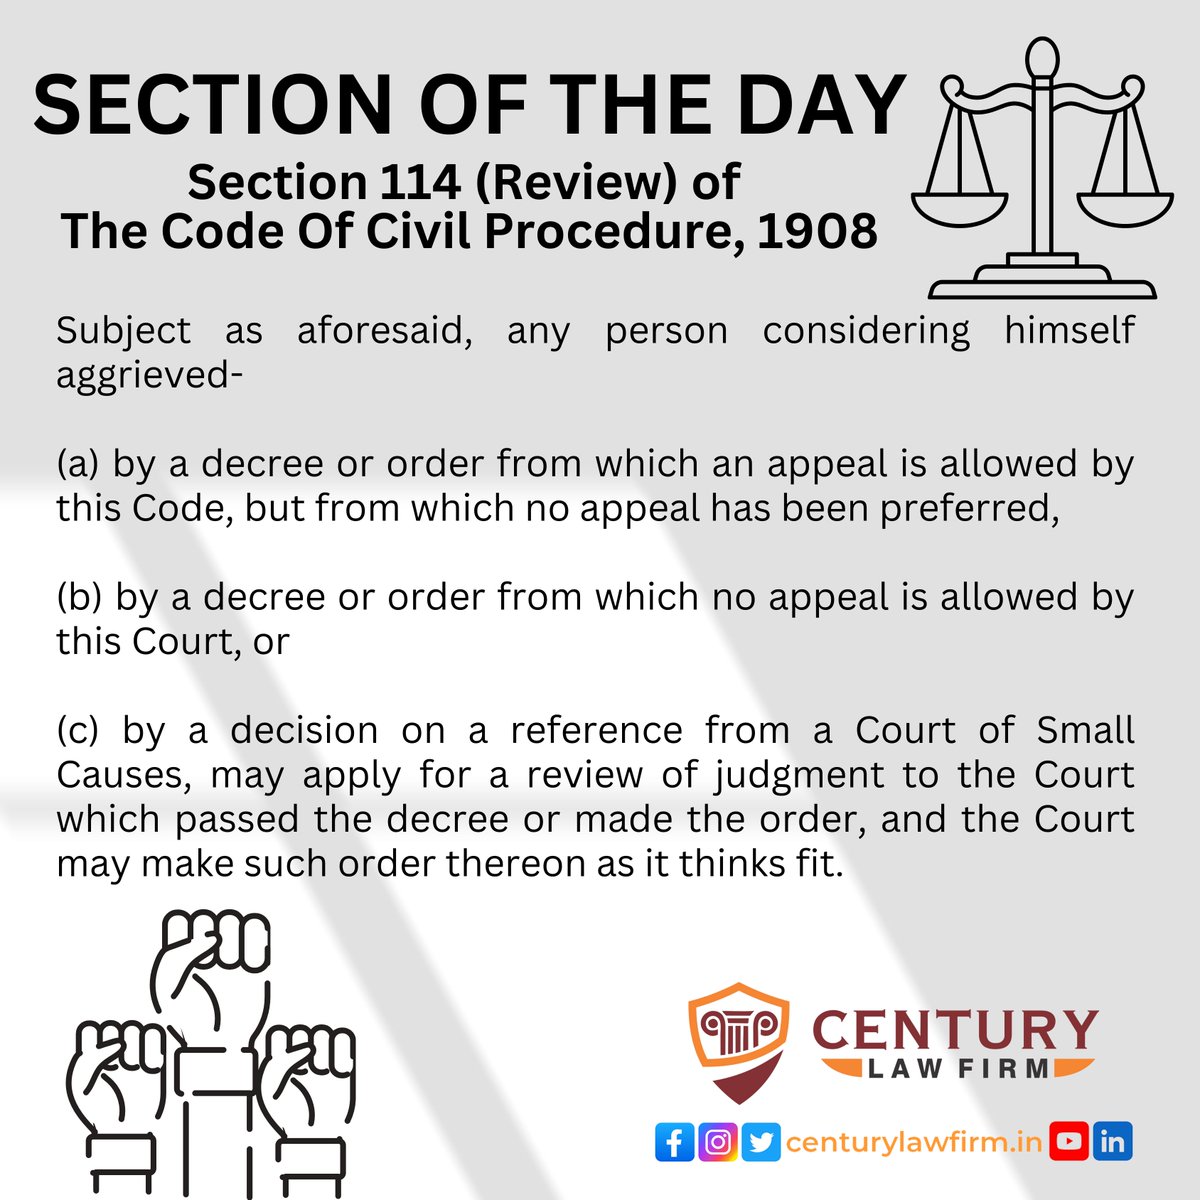 SECTION OF THE DAY

Section 114 (Review) of 
The Code Of Civil Procedure, 1908

centurylawfirm.in

#114 #section114 #law #lawschool #legalmaxim #lawyers #news #maximoftheday #centurylawfirm #lawstudents #lawyerlife #advocate #delhiadvocate #delhihighcourt #supremecourt